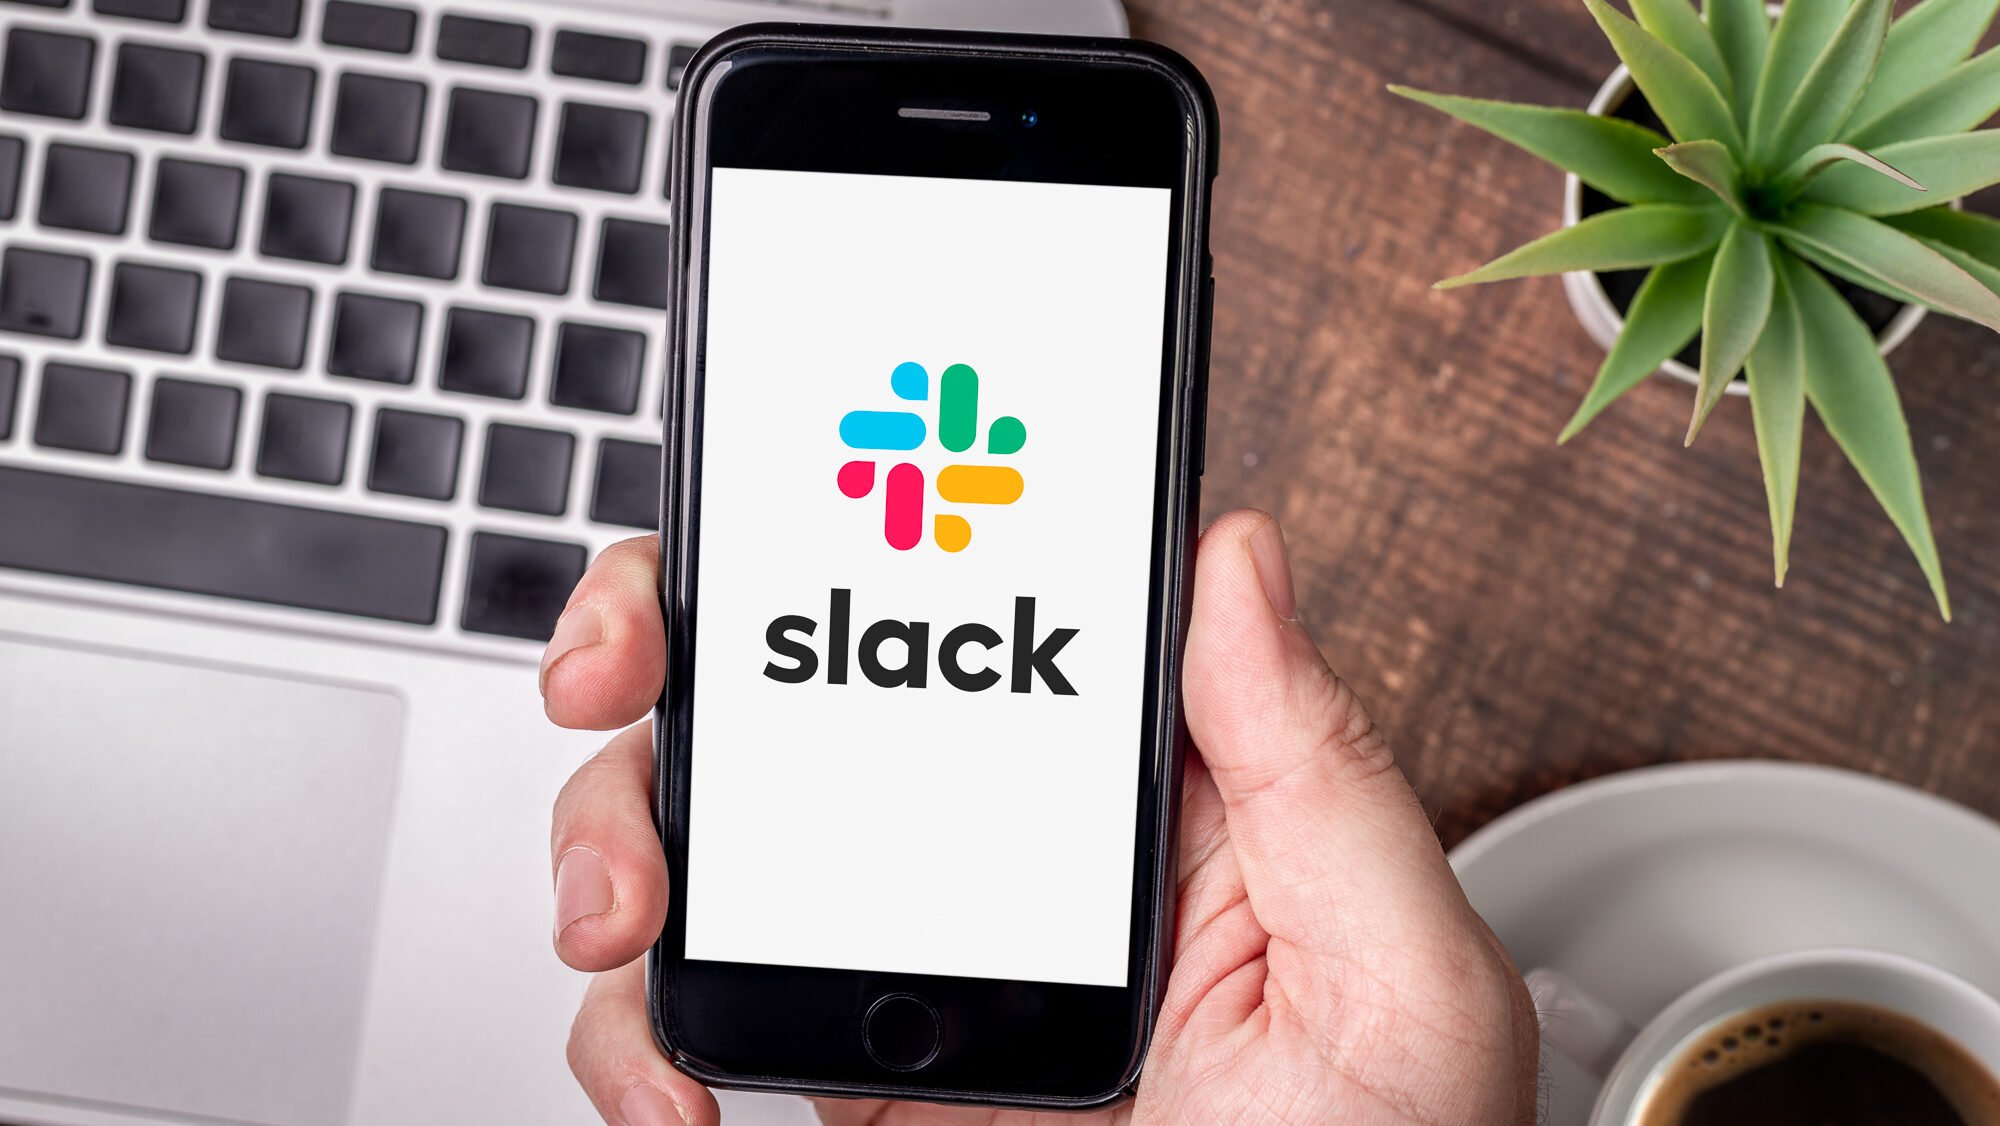 Slack mobile app on a smartphone screen, held by a person over their desk